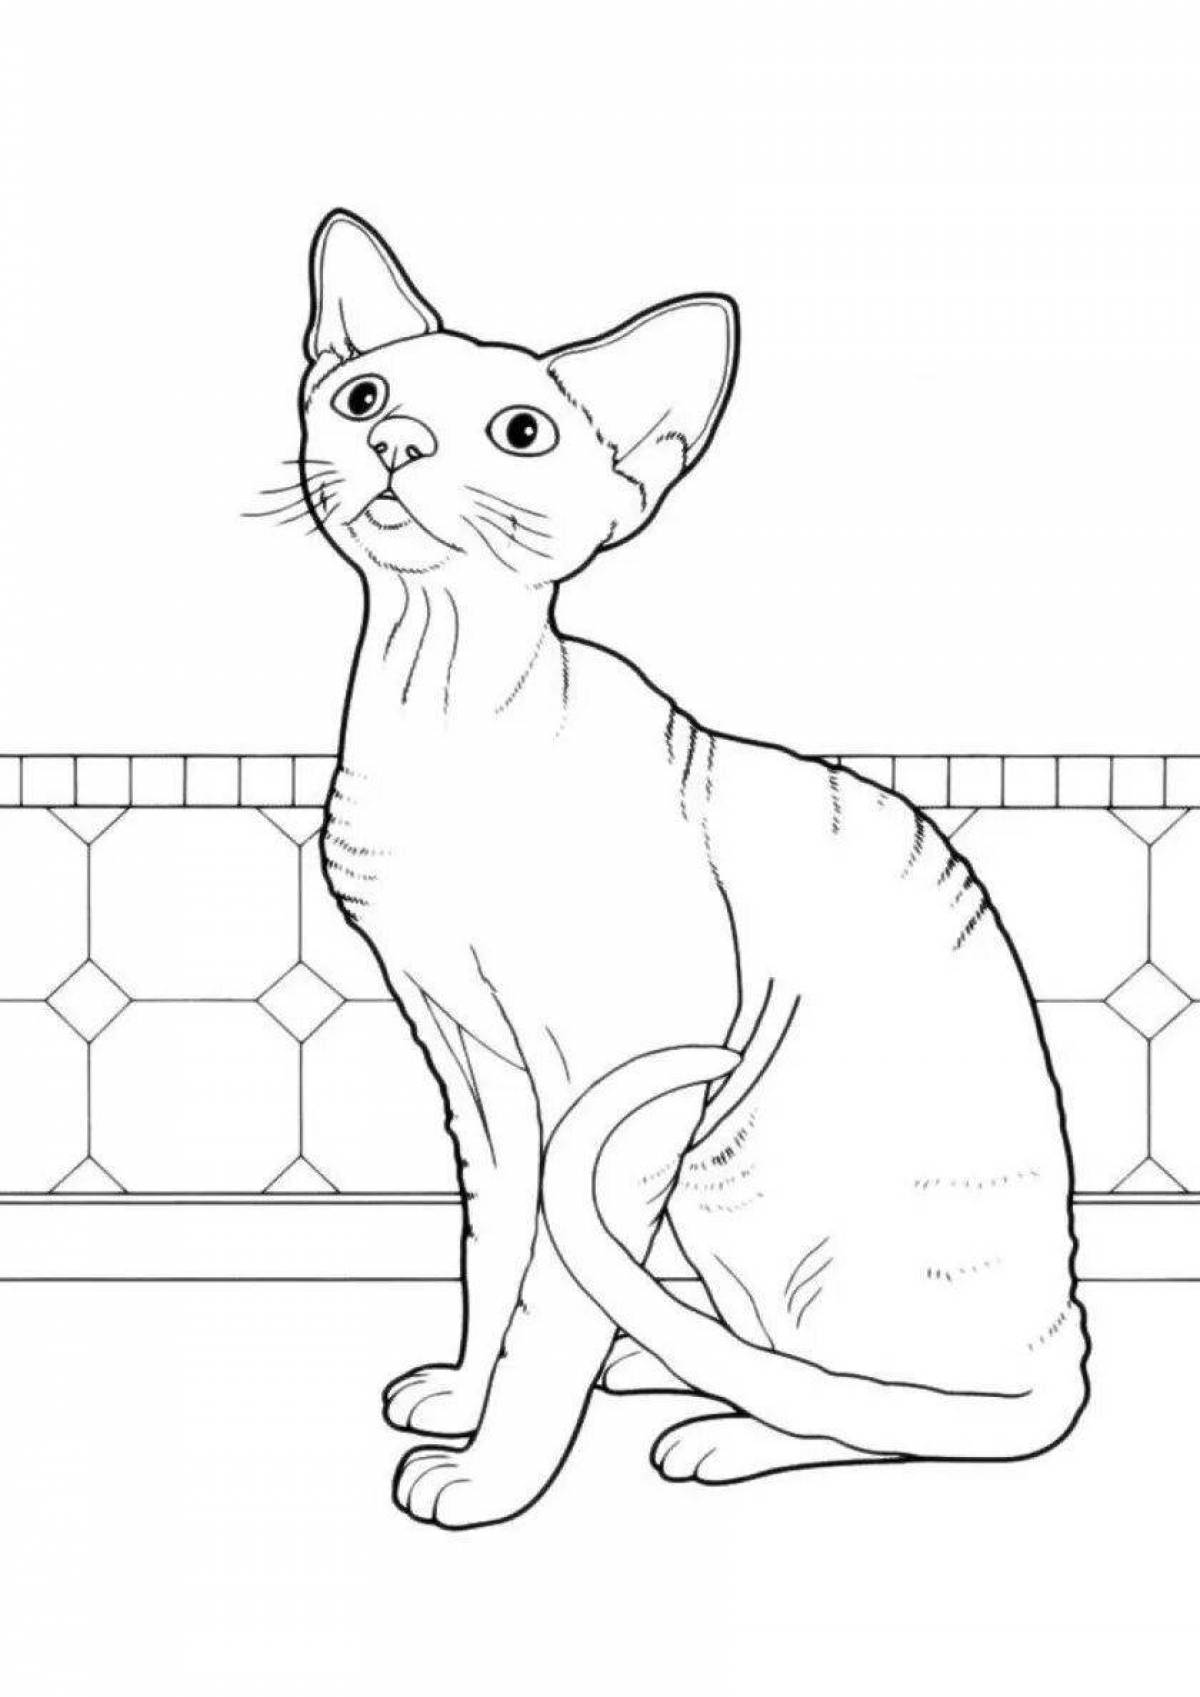 Intriguing Sphynx cat coloring page